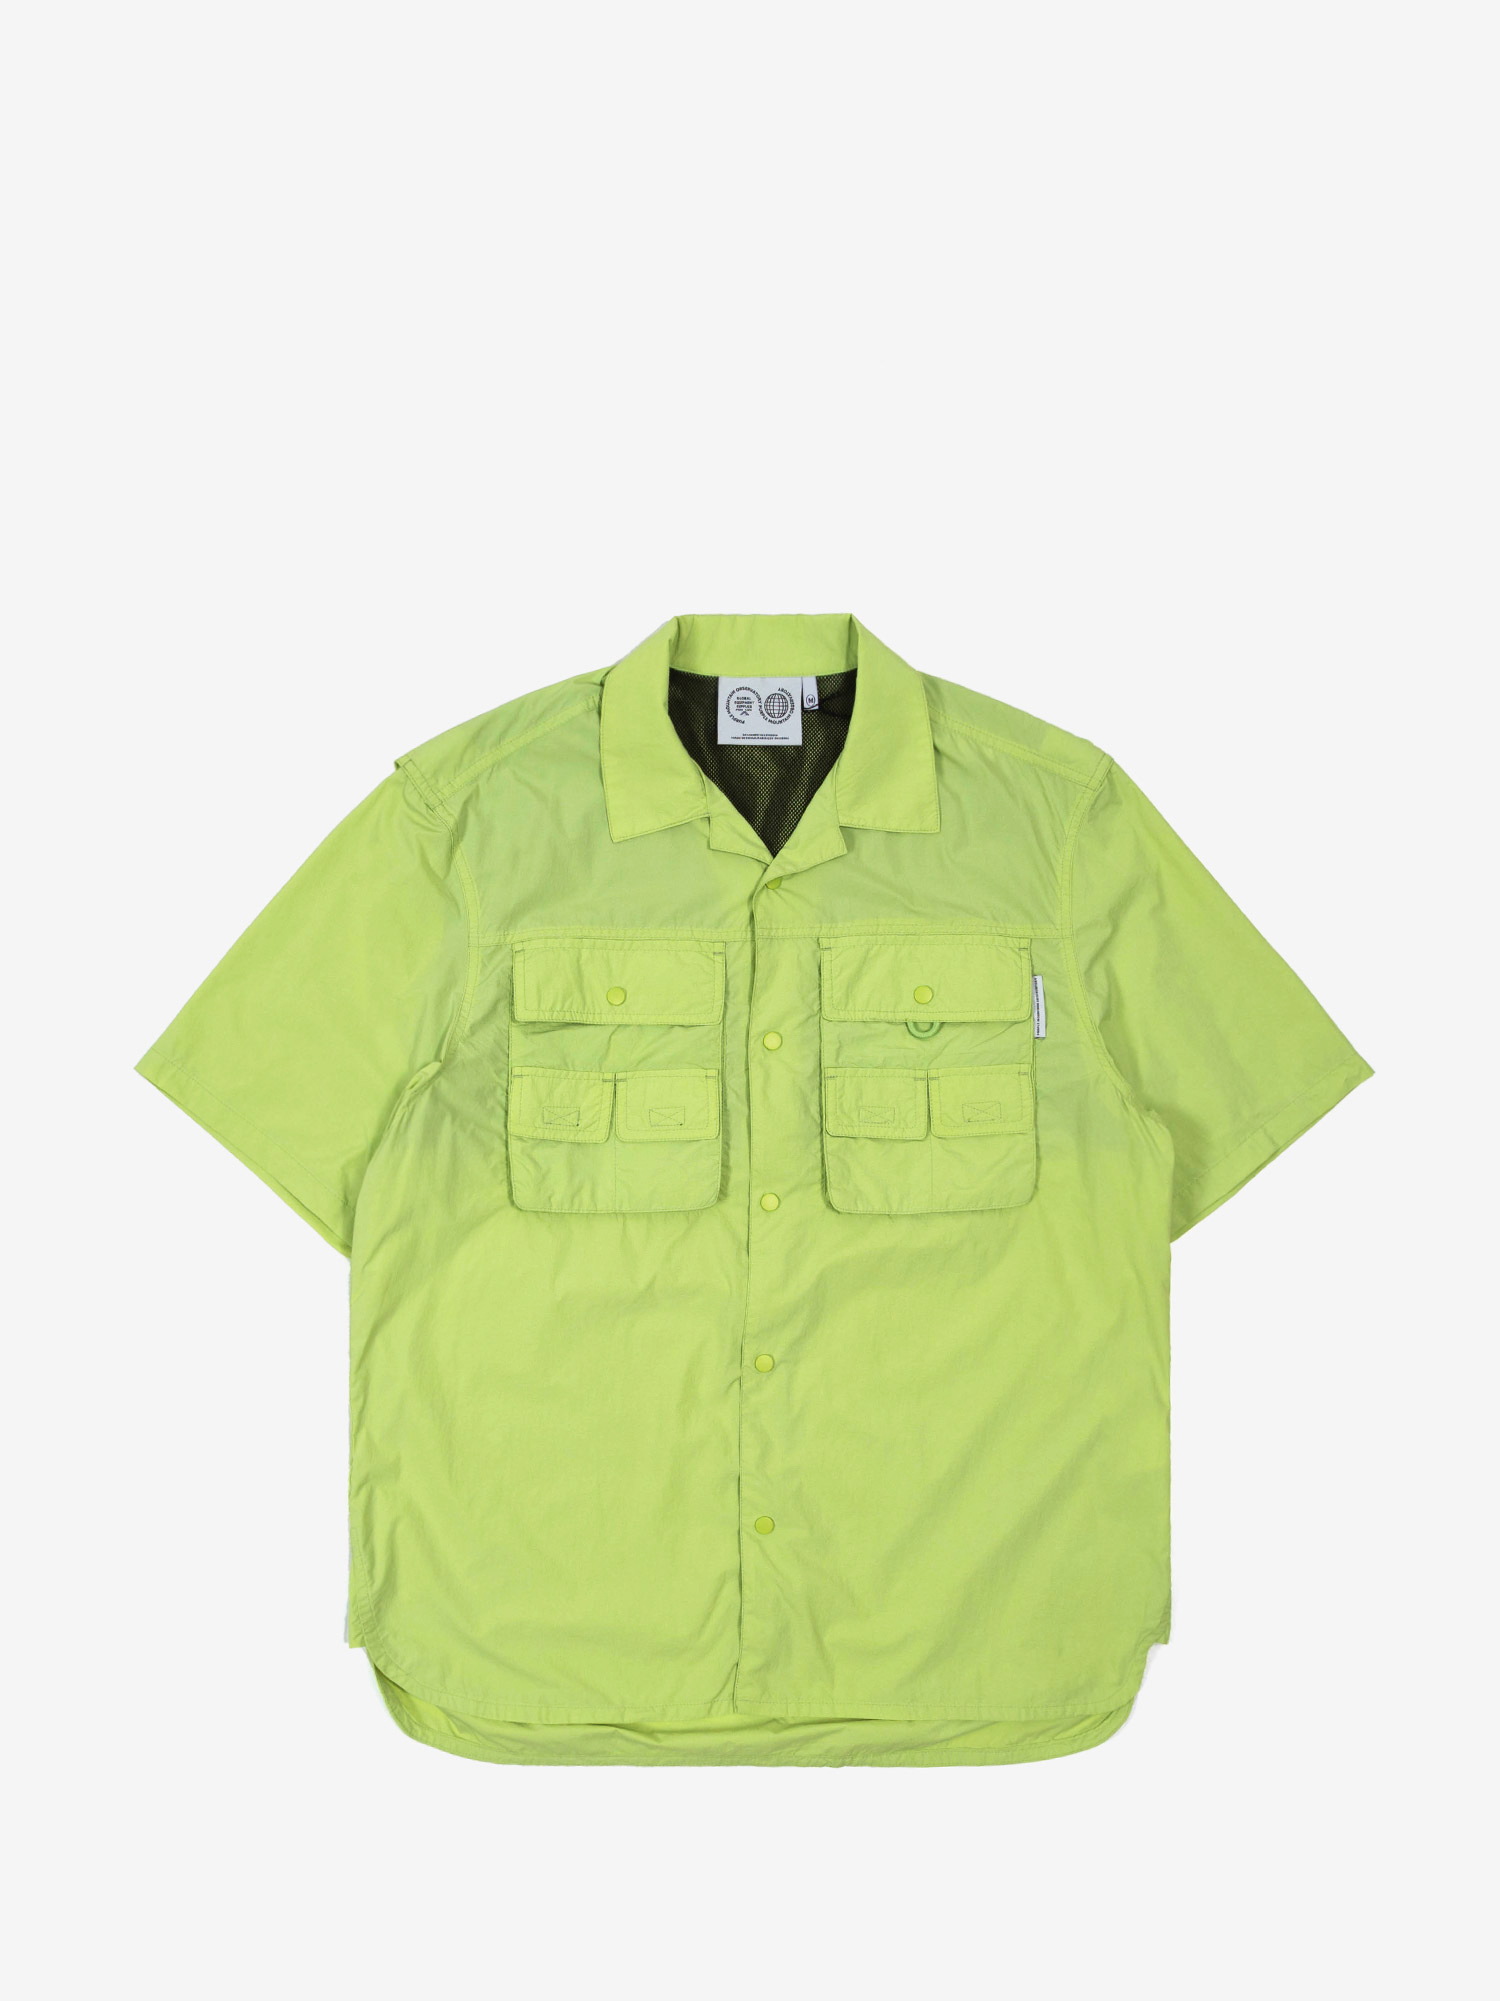 Featured image for “TRAIL MULTI POCKET SHIRT LIME”